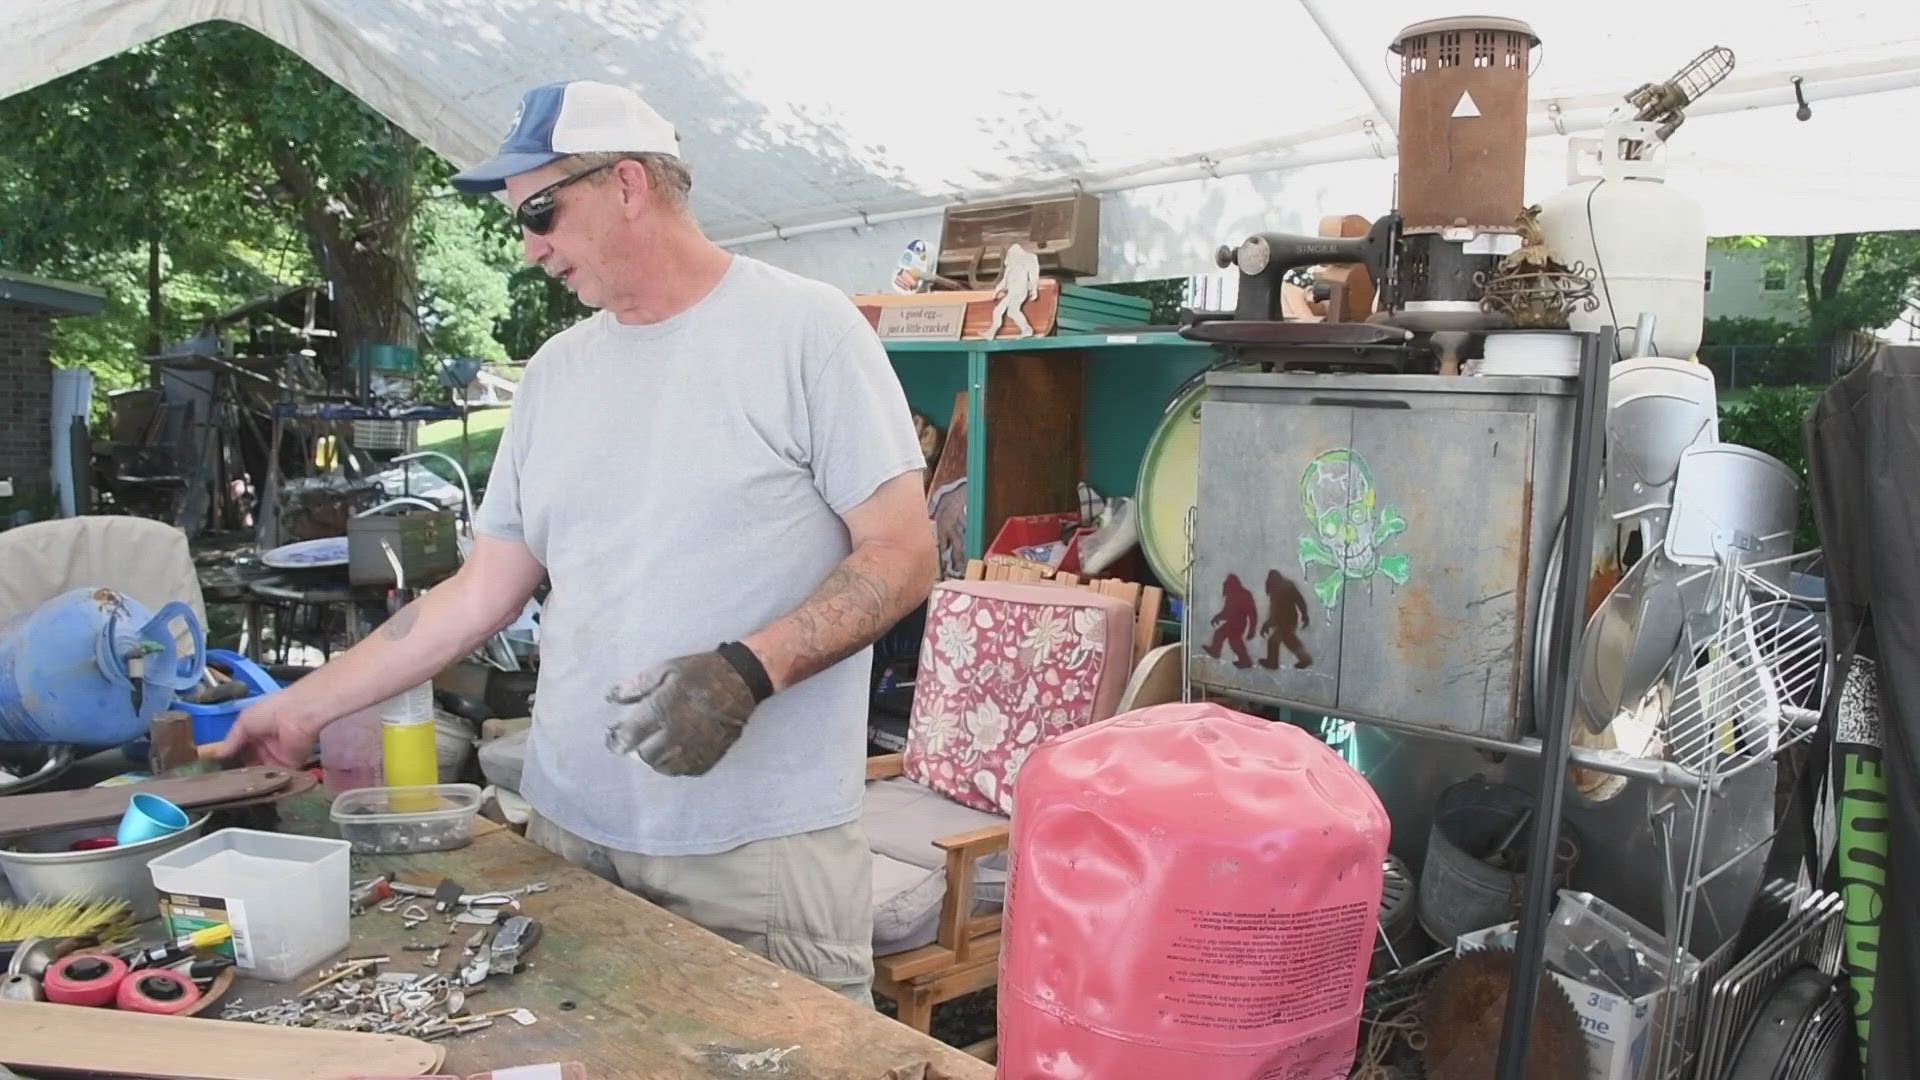 Two years ago Matthew Folsom started making his "yard art" using recycled and found materials.